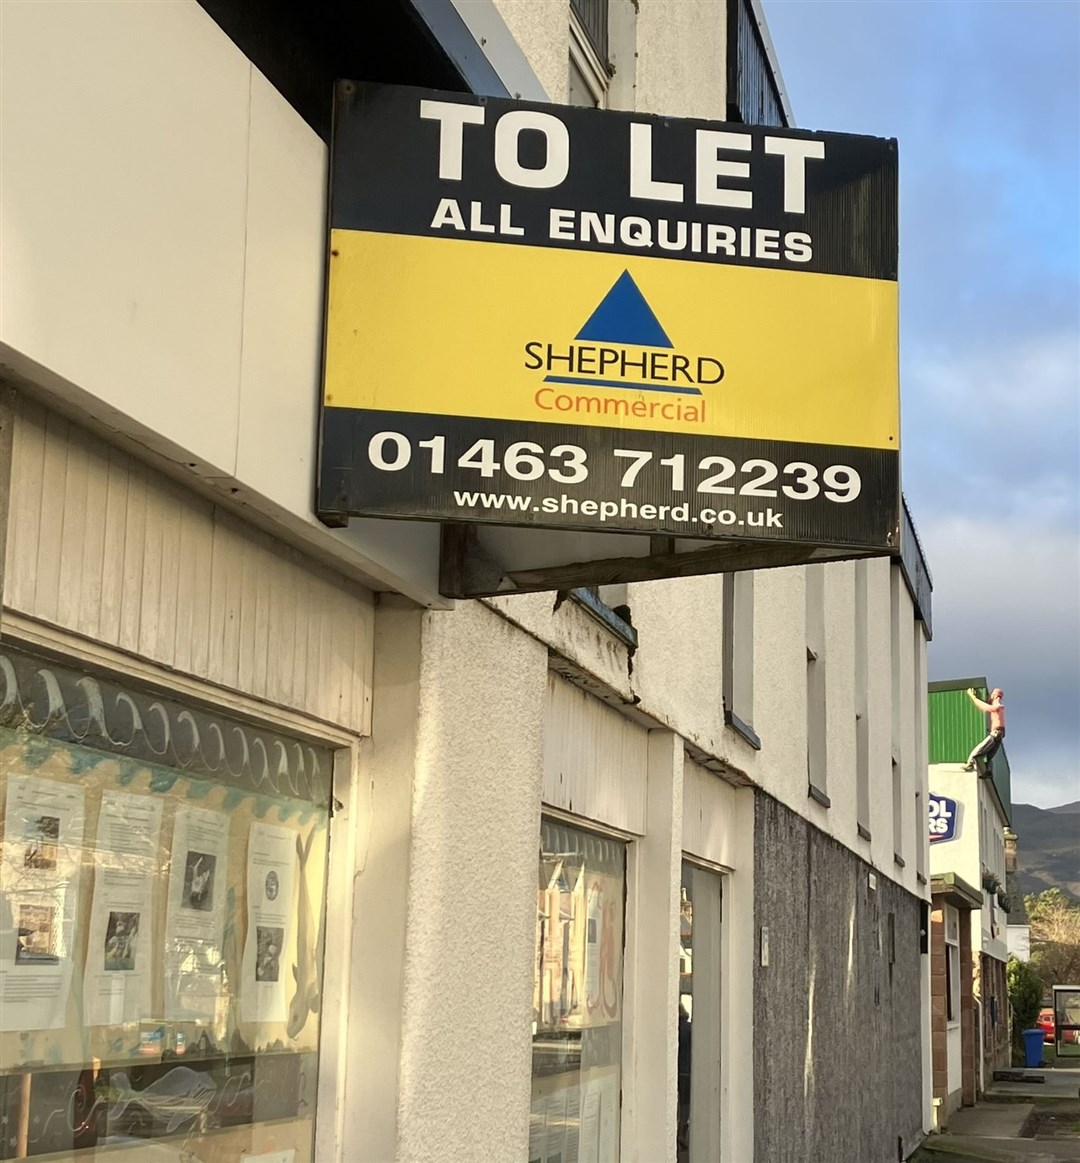 The former Costcutters premises has been offered to let.